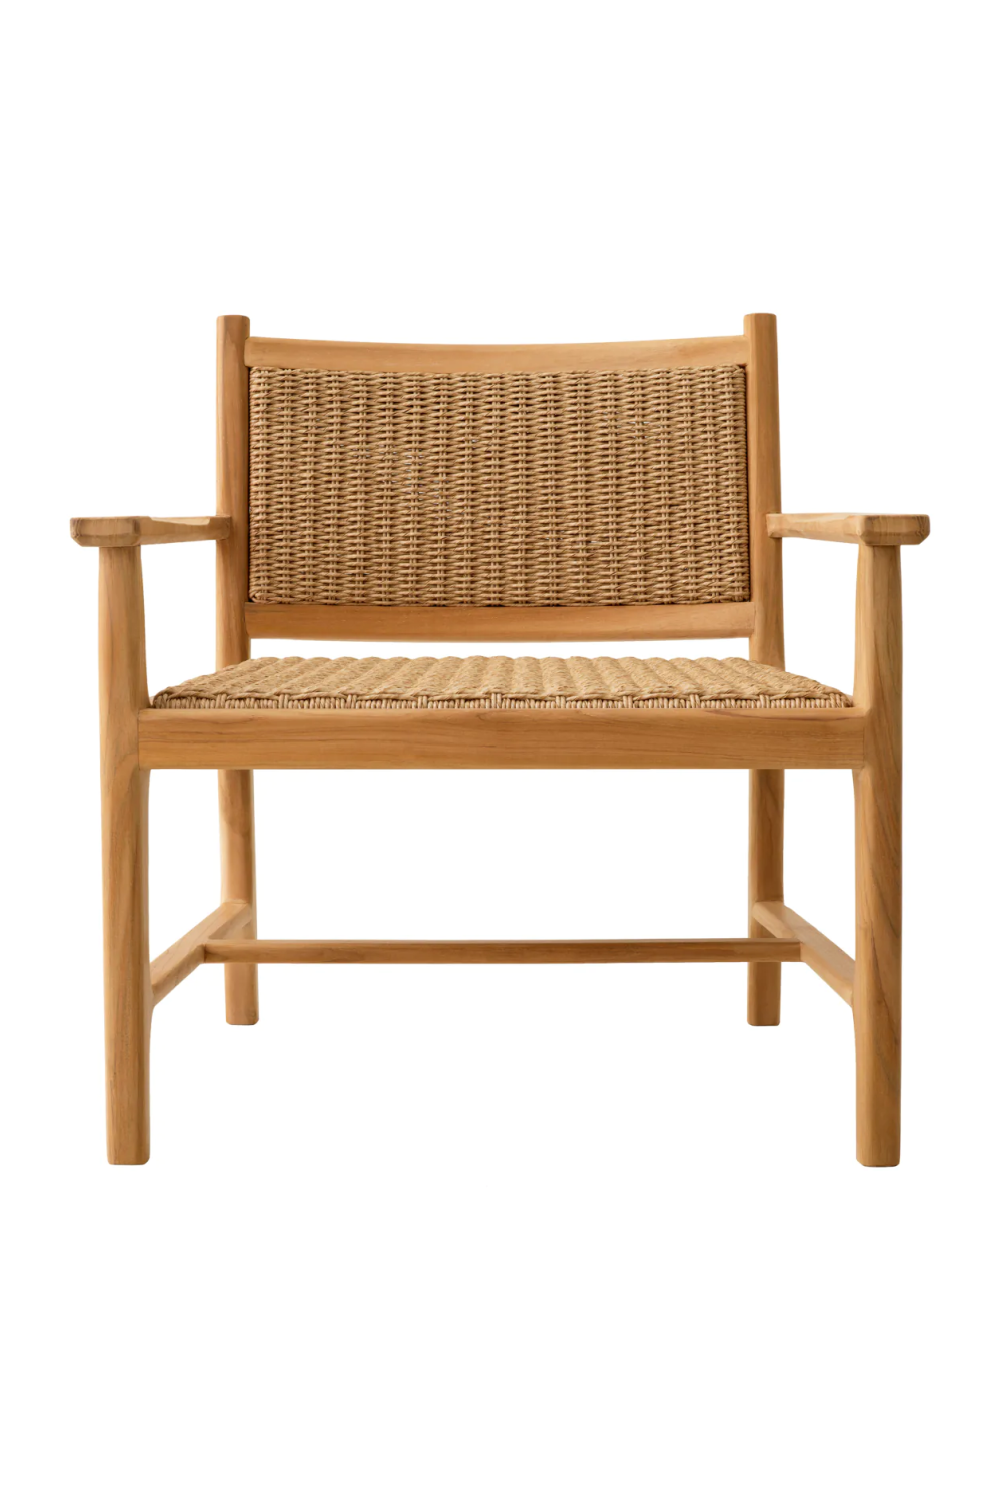 Image of Natural Weave Outdoor Lounge Chair | Eichholtz Pivetti